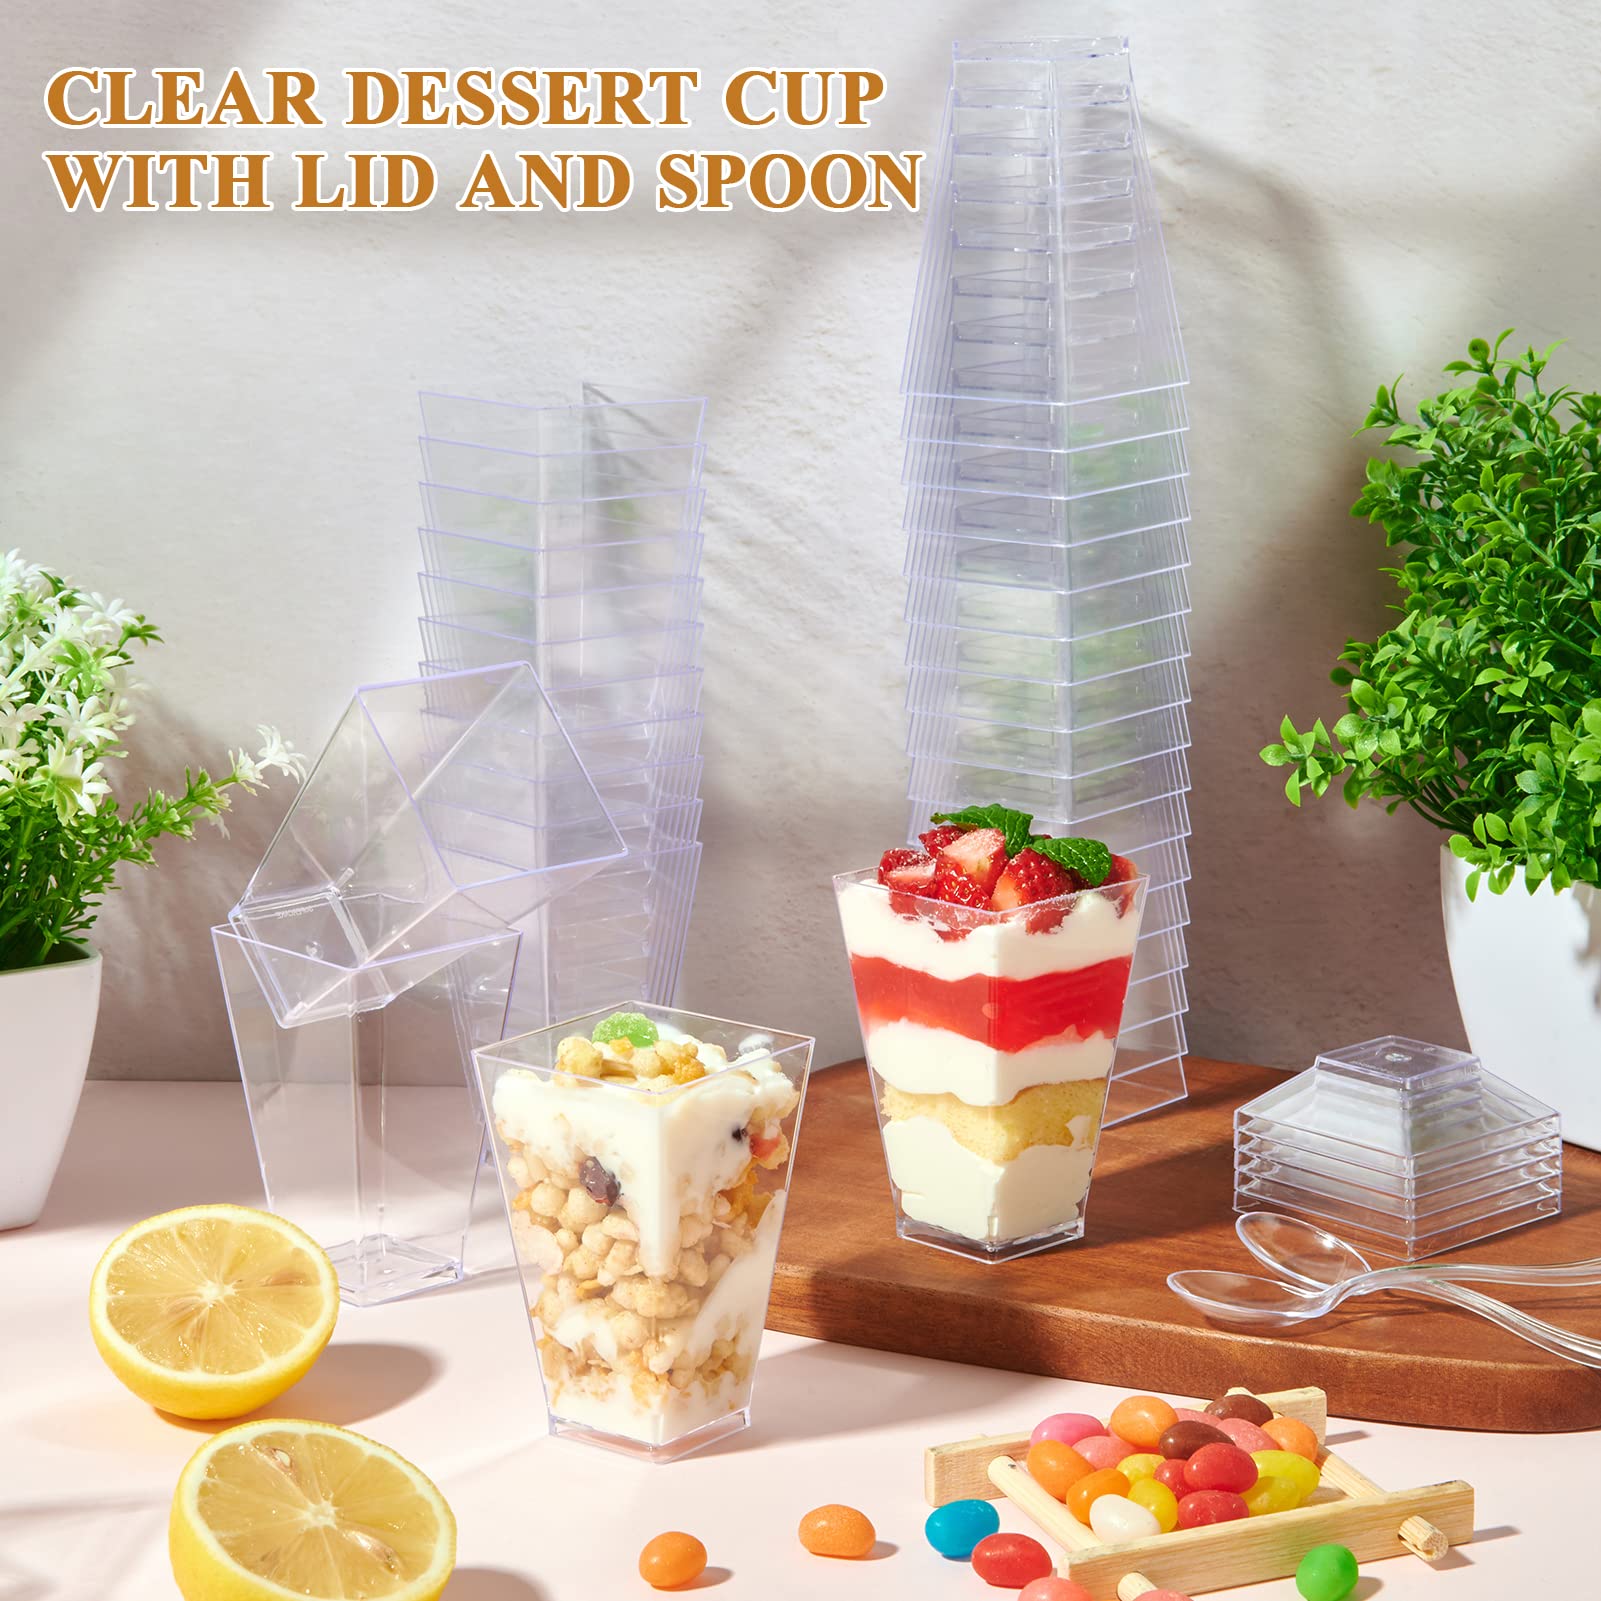 JOLLY CHEF 100 x 3 oz Mini Dessert Cups with Spoons and Lids, Square Tall - Clear Plastic Parfait Appetizer Cup - Small Reusable Serving Bowl for Party Desserts Appetizers